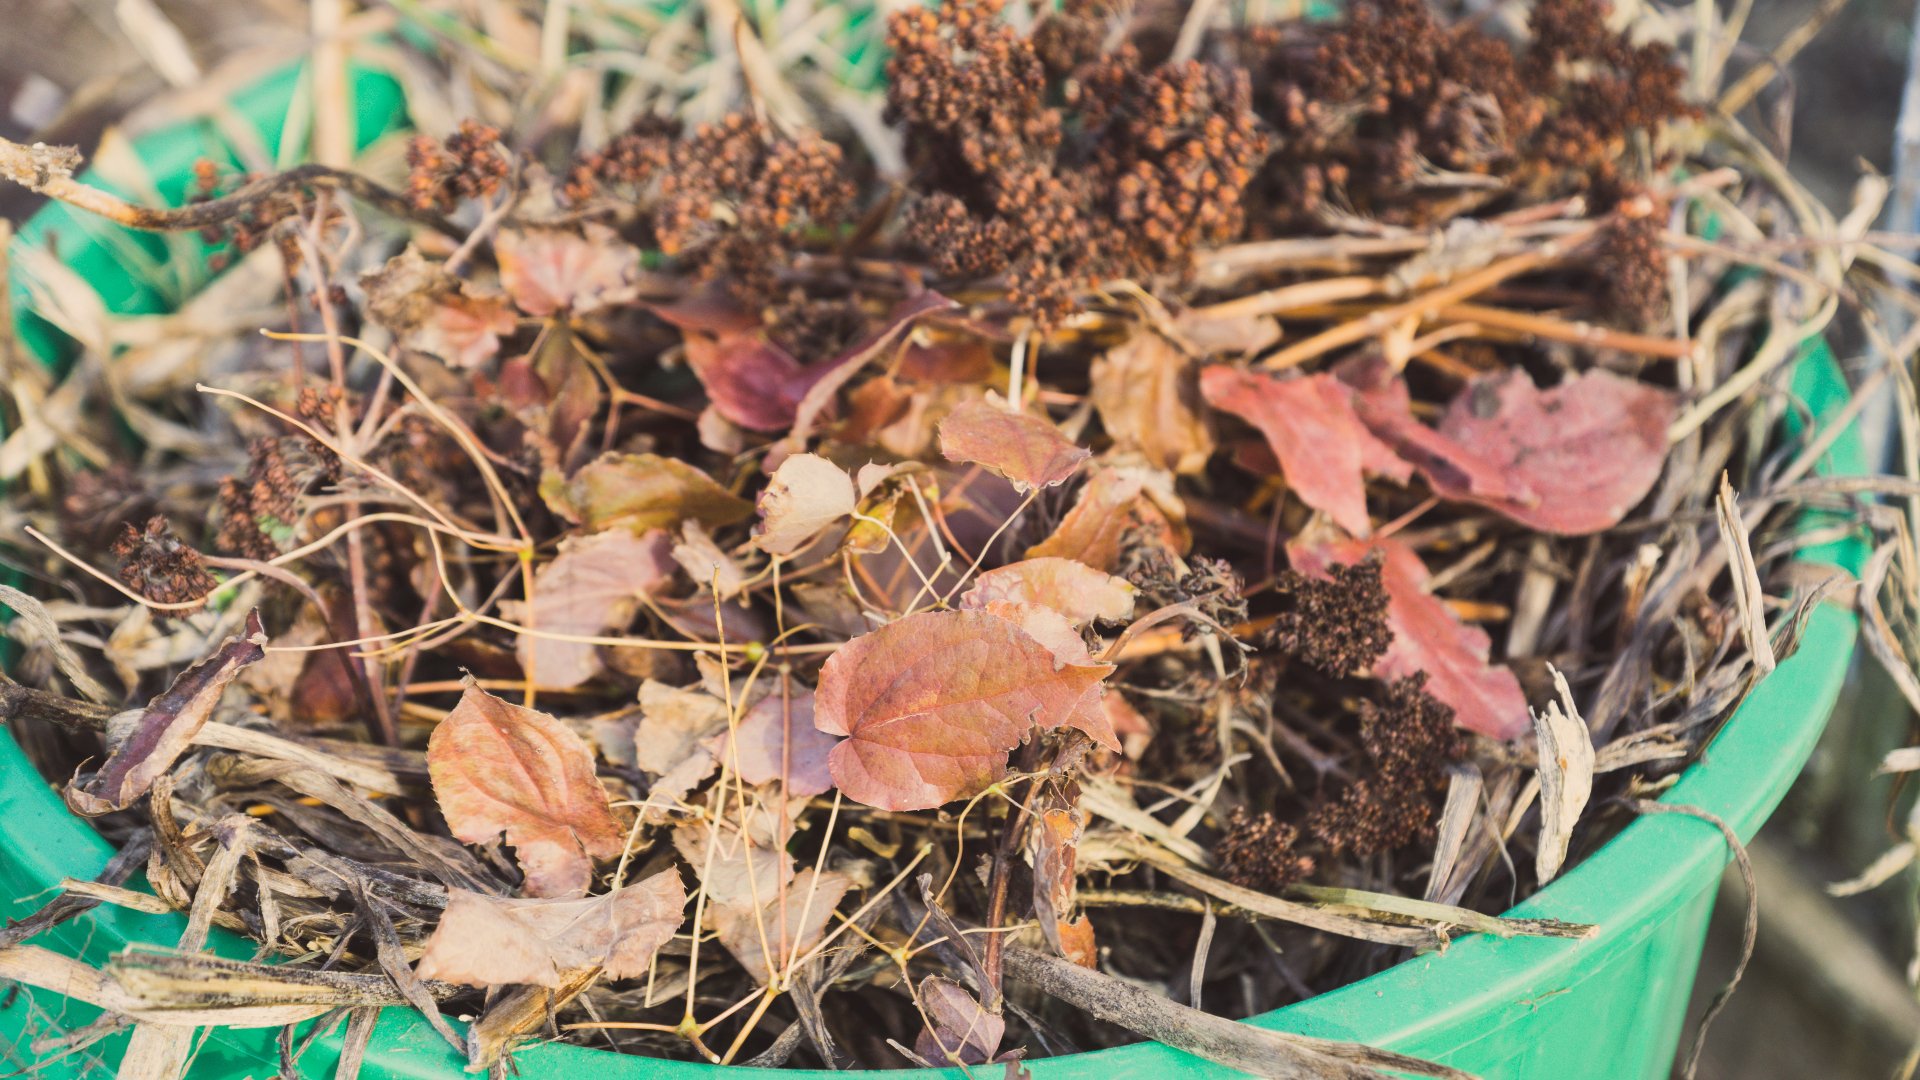 Fall Maintenance 101 - 6 Tasks That'll Help Get Your Yard in Its Best Shape